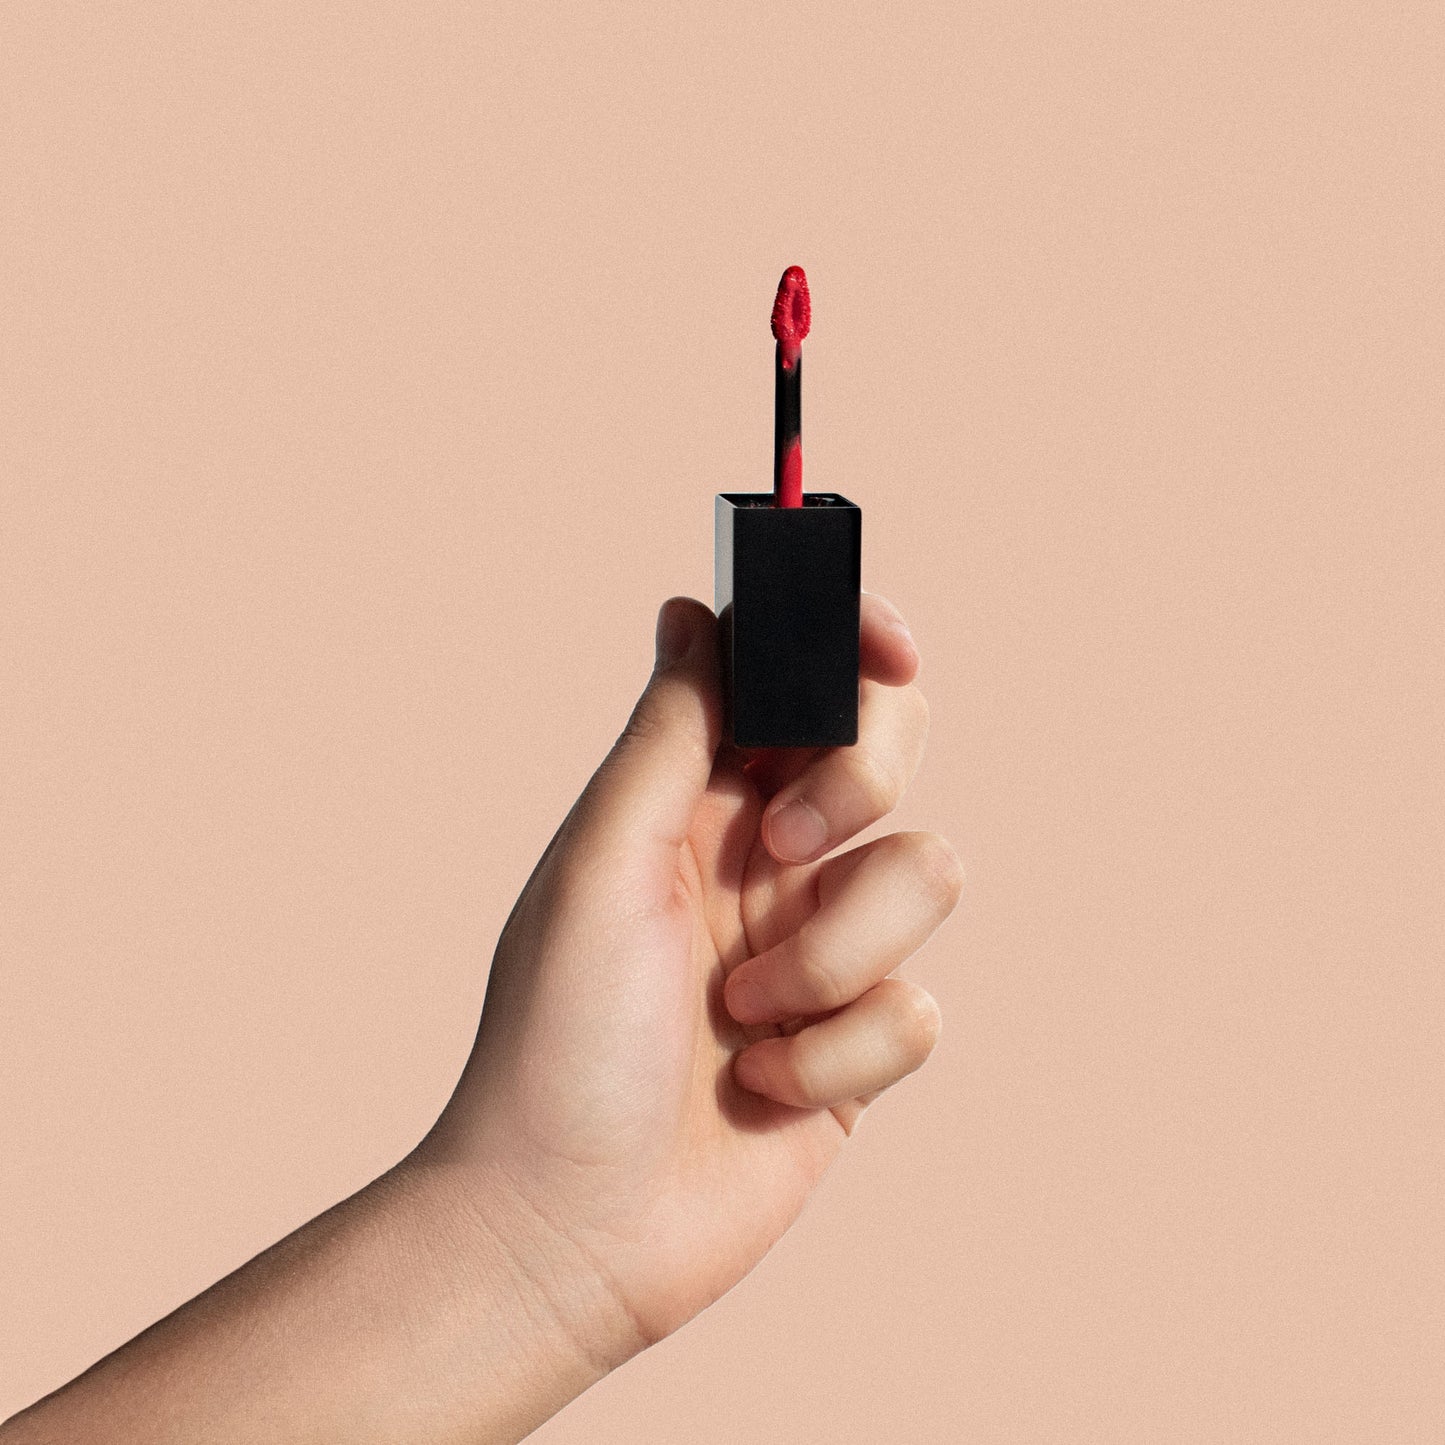 Experience the bold and fiery color of True Crimson! This vibrant red lip stain is made from Kermes vermilio, a scale insect dye known for its rich and intense shades. Infused with Vitamin E, this long-lasting matte stain will leave your lips feeling nourished and looking stunning.